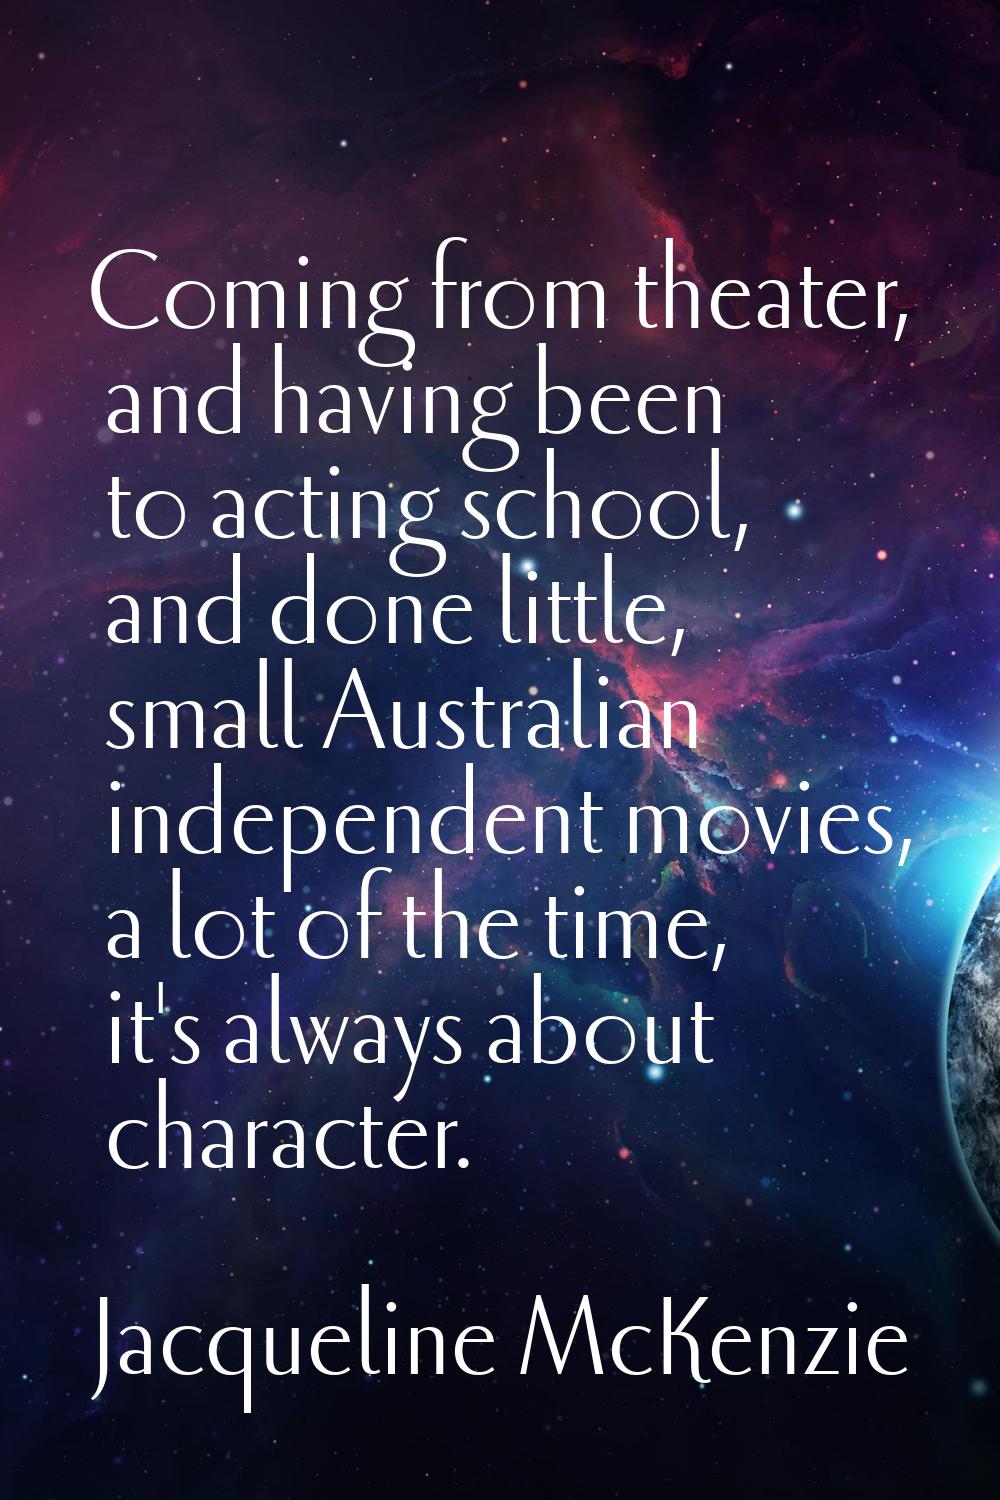 Coming from theater, and having been to acting school, and done little, small Australian independen